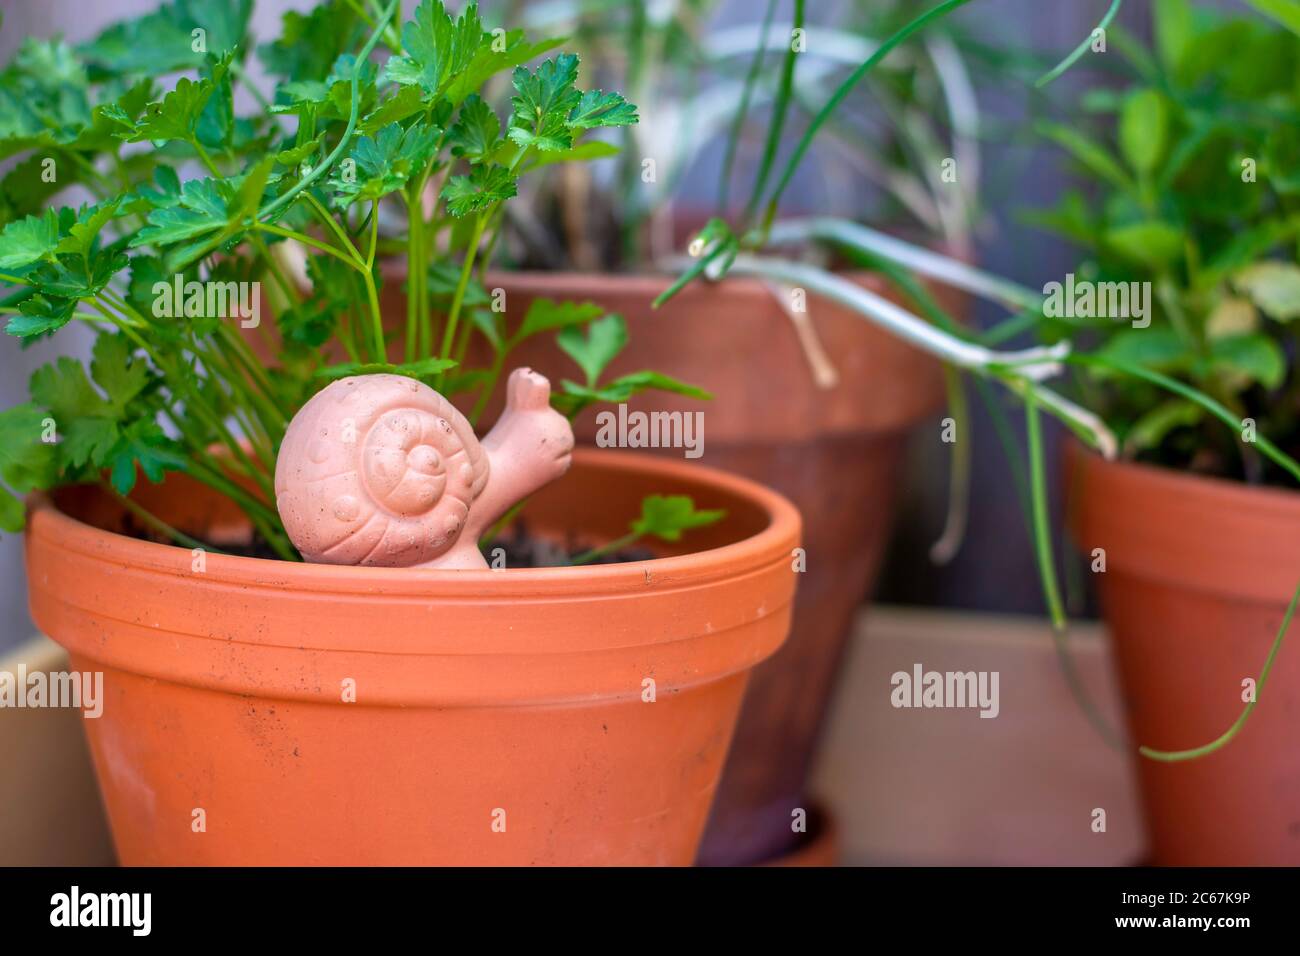 Terracotta plant pots arranged on a wooden table with fresh parsley herbs and a snail decoration on an outdoor planting table for herb gardening. Stock Photo